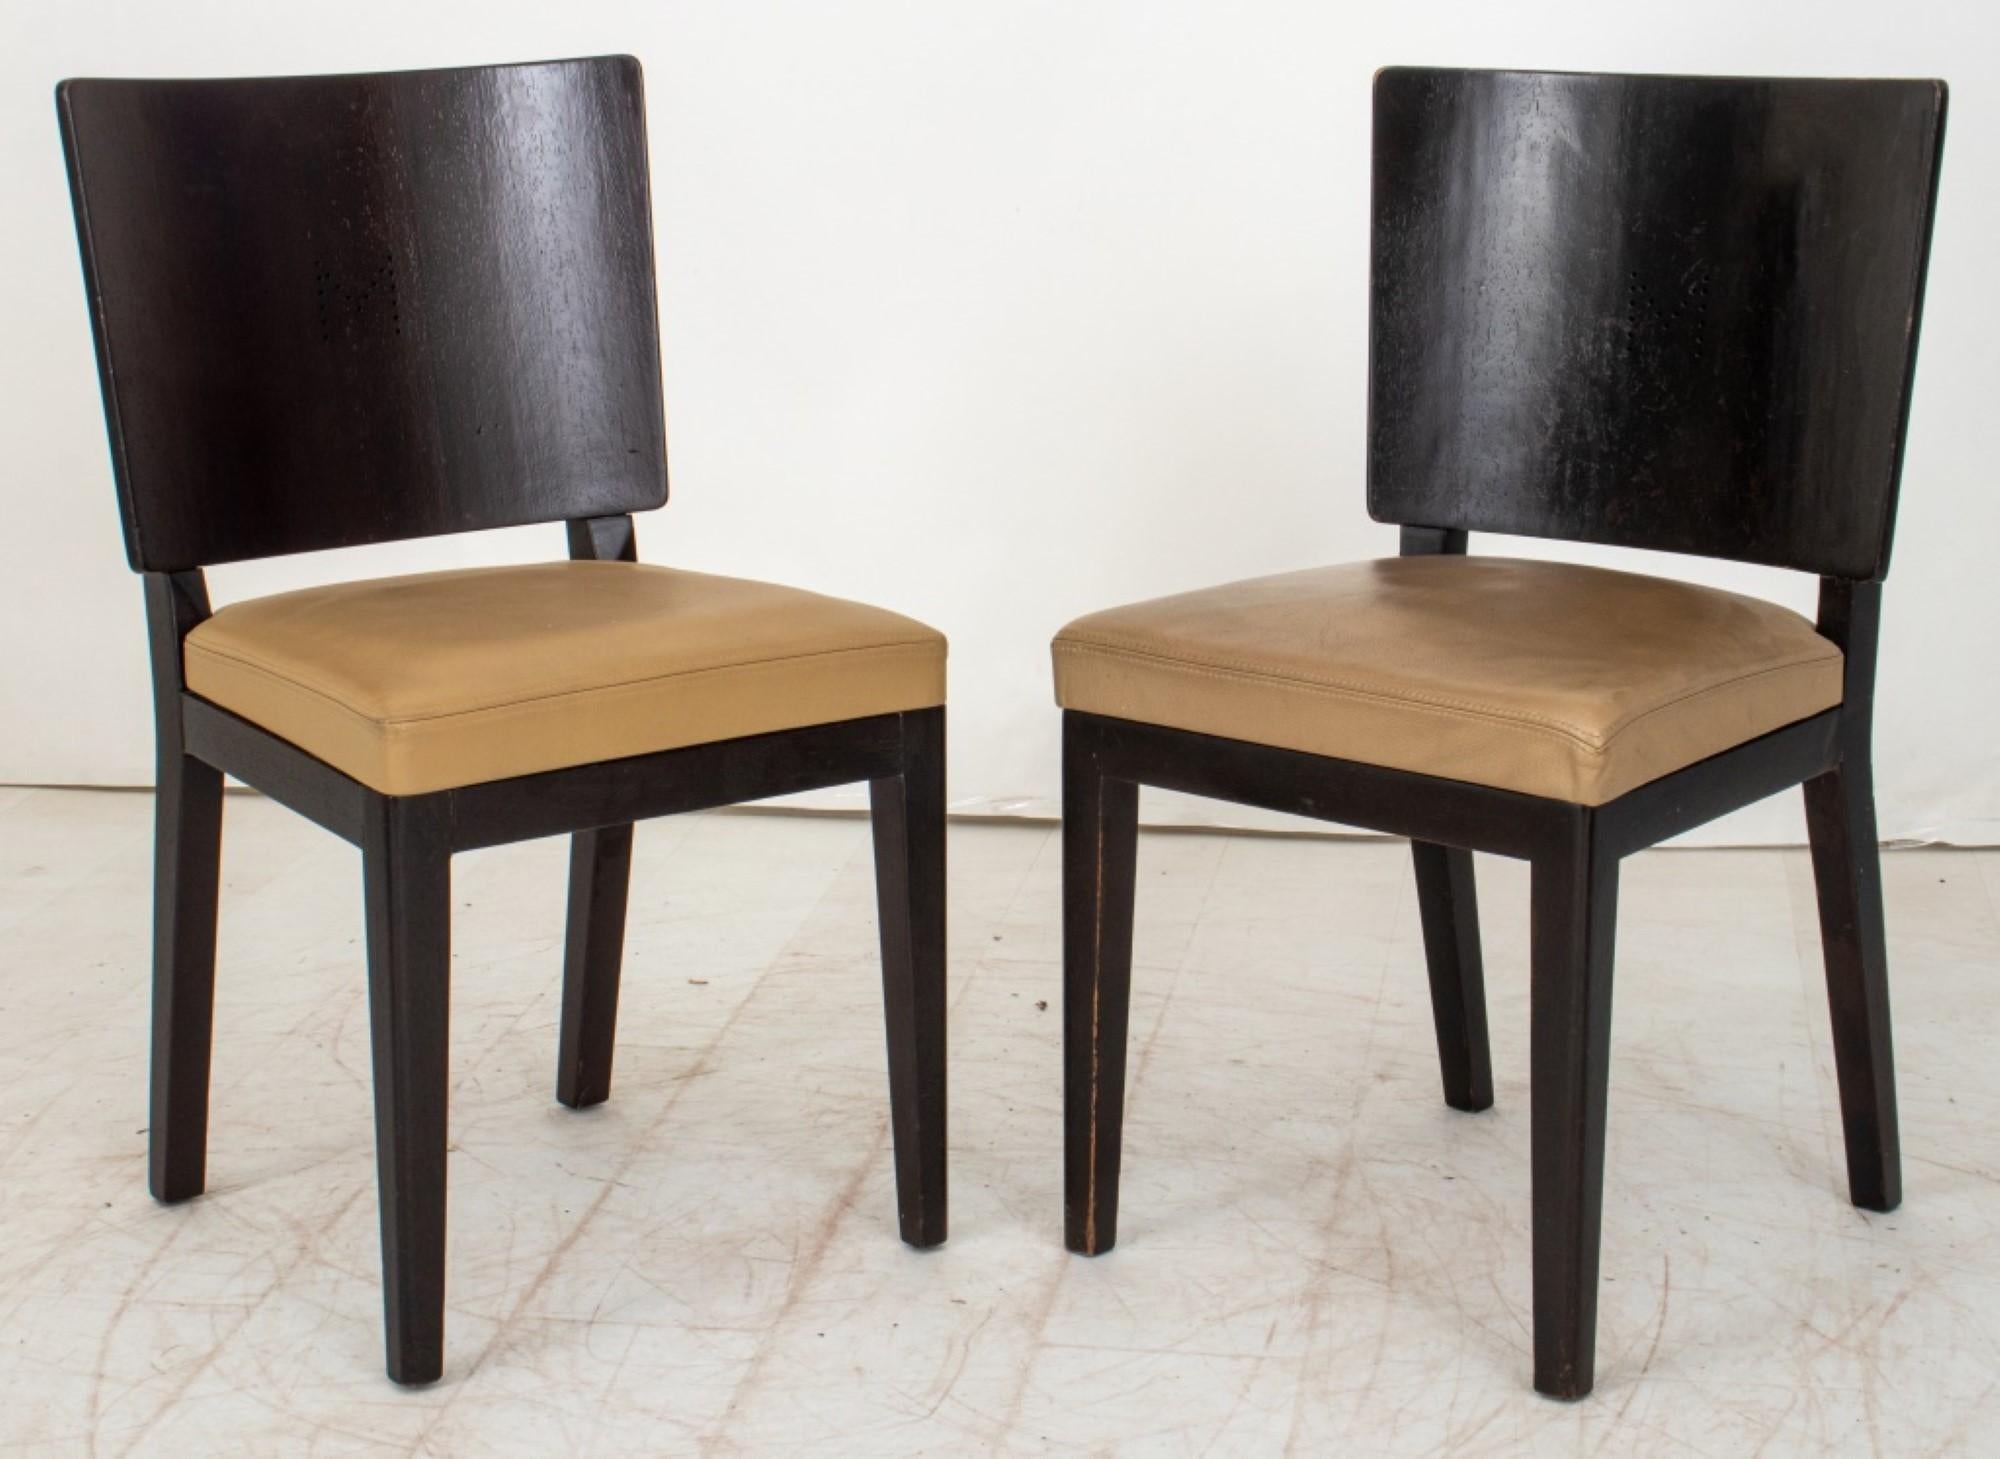 Christian Liaigre, Mercer Kitchen Dining Chairs, 2	Christian Liaigre, Mercer Kit In Good Condition For Sale In New York, NY